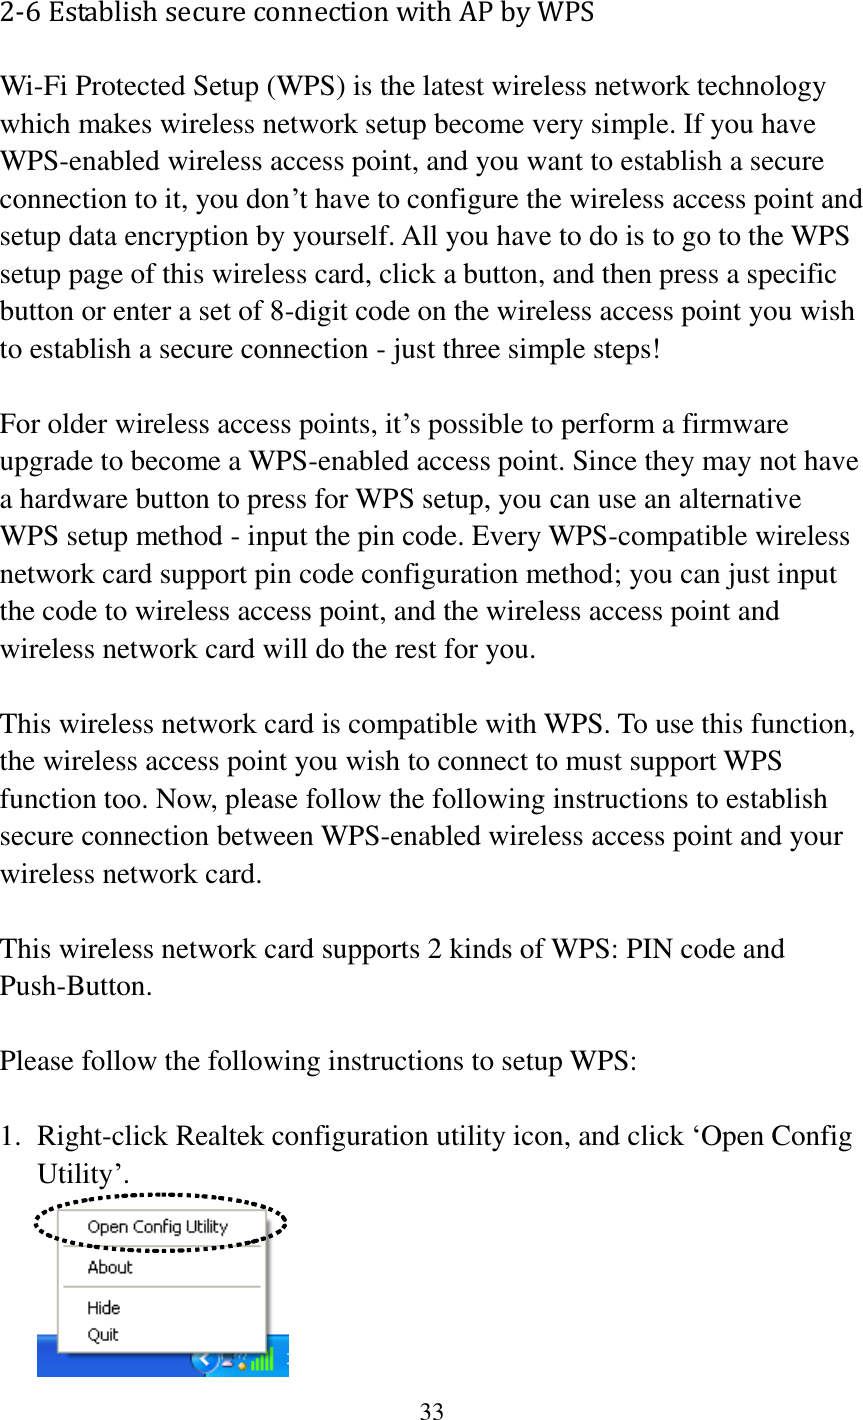 33  2-6 Establish secure connection with AP by WPS Wi-Fi Protected Setup (WPS) is the latest wireless network technology which makes wireless network setup become very simple. If you have WPS-enabled wireless access point, and you want to establish a secure connection to it, you don’t have to configure the wireless access point and setup data encryption by yourself. All you have to do is to go to the WPS setup page of this wireless card, click a button, and then press a specific button or enter a set of 8-digit code on the wireless access point you wish to establish a secure connection - just three simple steps!    For older wireless access points, it’s possible to perform a firmware upgrade to become a WPS-enabled access point. Since they may not have a hardware button to press for WPS setup, you can use an alternative WPS setup method - input the pin code. Every WPS-compatible wireless network card support pin code configuration method; you can just input the code to wireless access point, and the wireless access point and wireless network card will do the rest for you.  This wireless network card is compatible with WPS. To use this function, the wireless access point you wish to connect to must support WPS function too. Now, please follow the following instructions to establish secure connection between WPS-enabled wireless access point and your wireless network card.  This wireless network card supports 2 kinds of WPS: PIN code and Push-Button.    Please follow the following instructions to setup WPS:  1. Right-click Realtek configuration utility icon, and click ‘Open Config Utility’.  